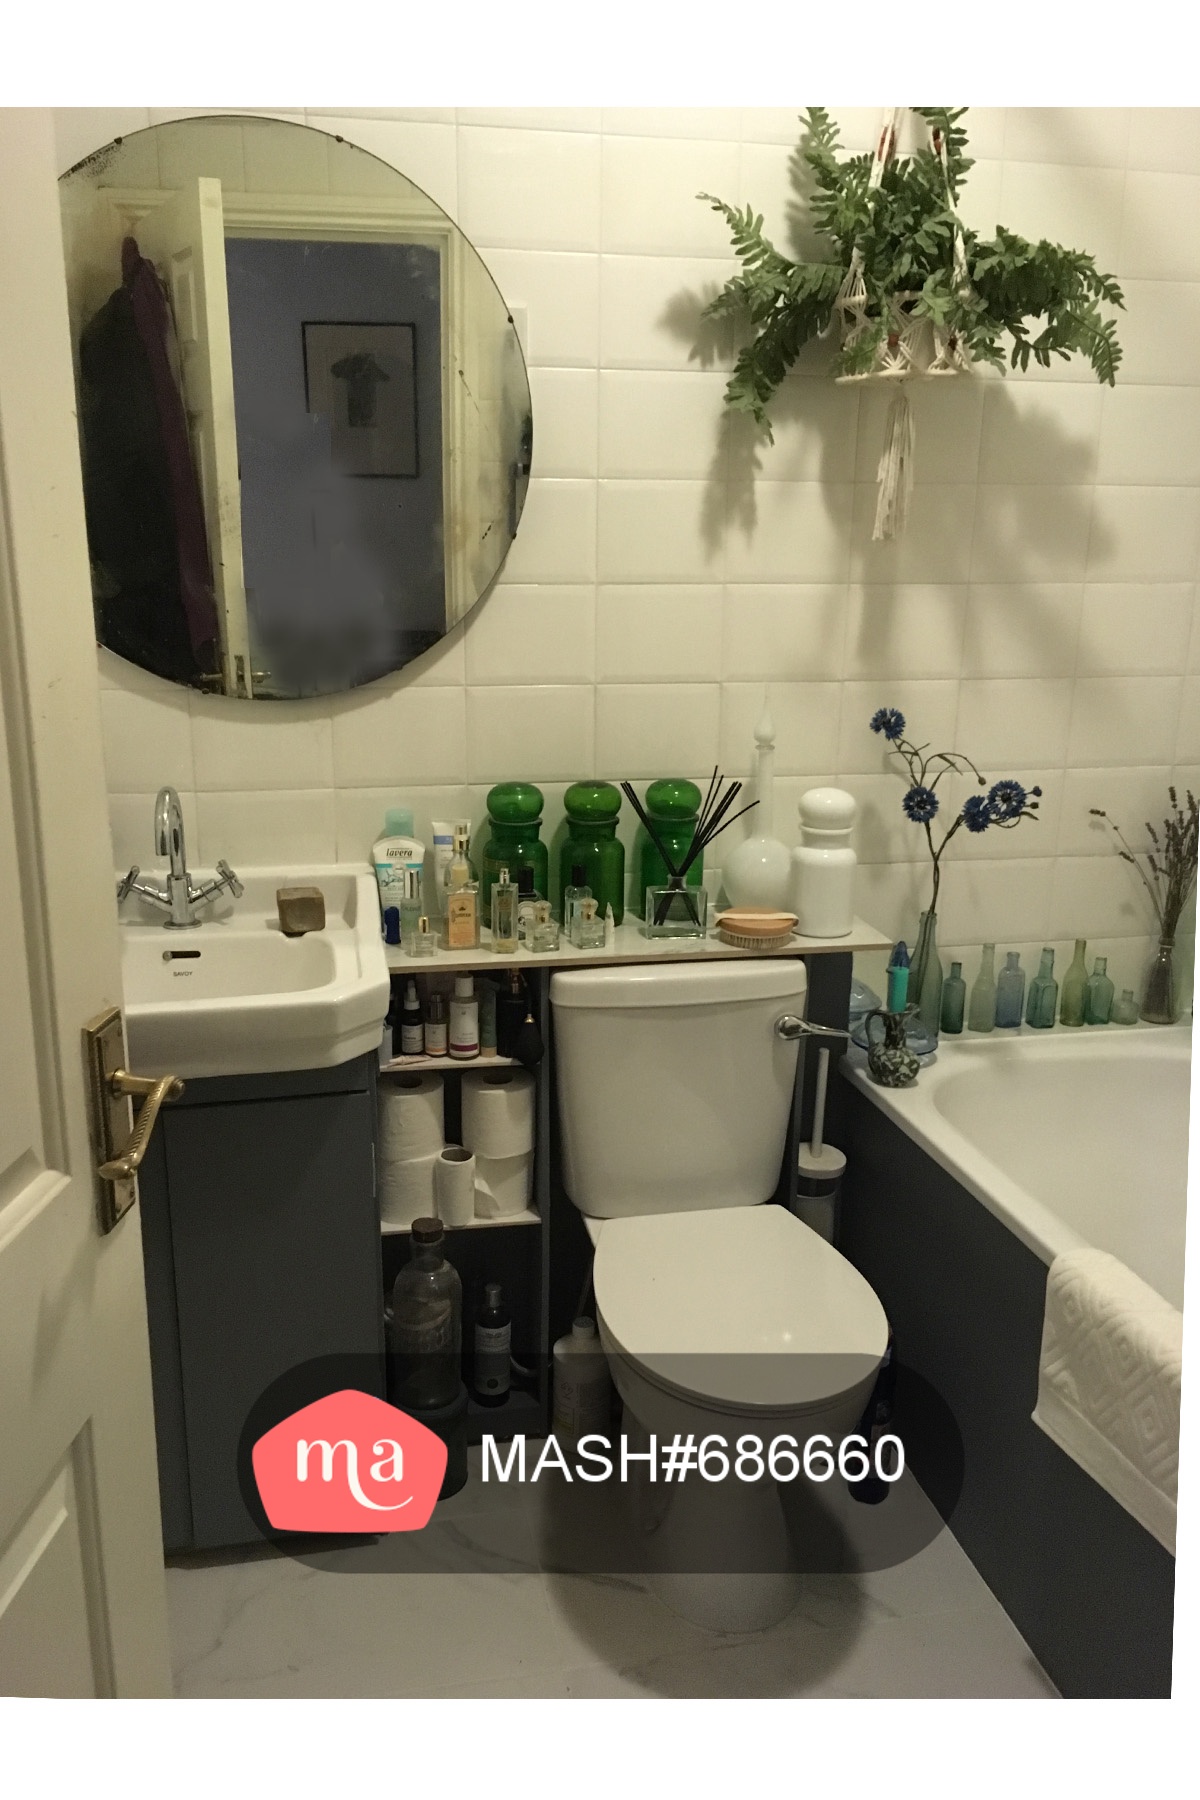 2 Bedroom Flat to rent in Muswell hill london - Mashroom